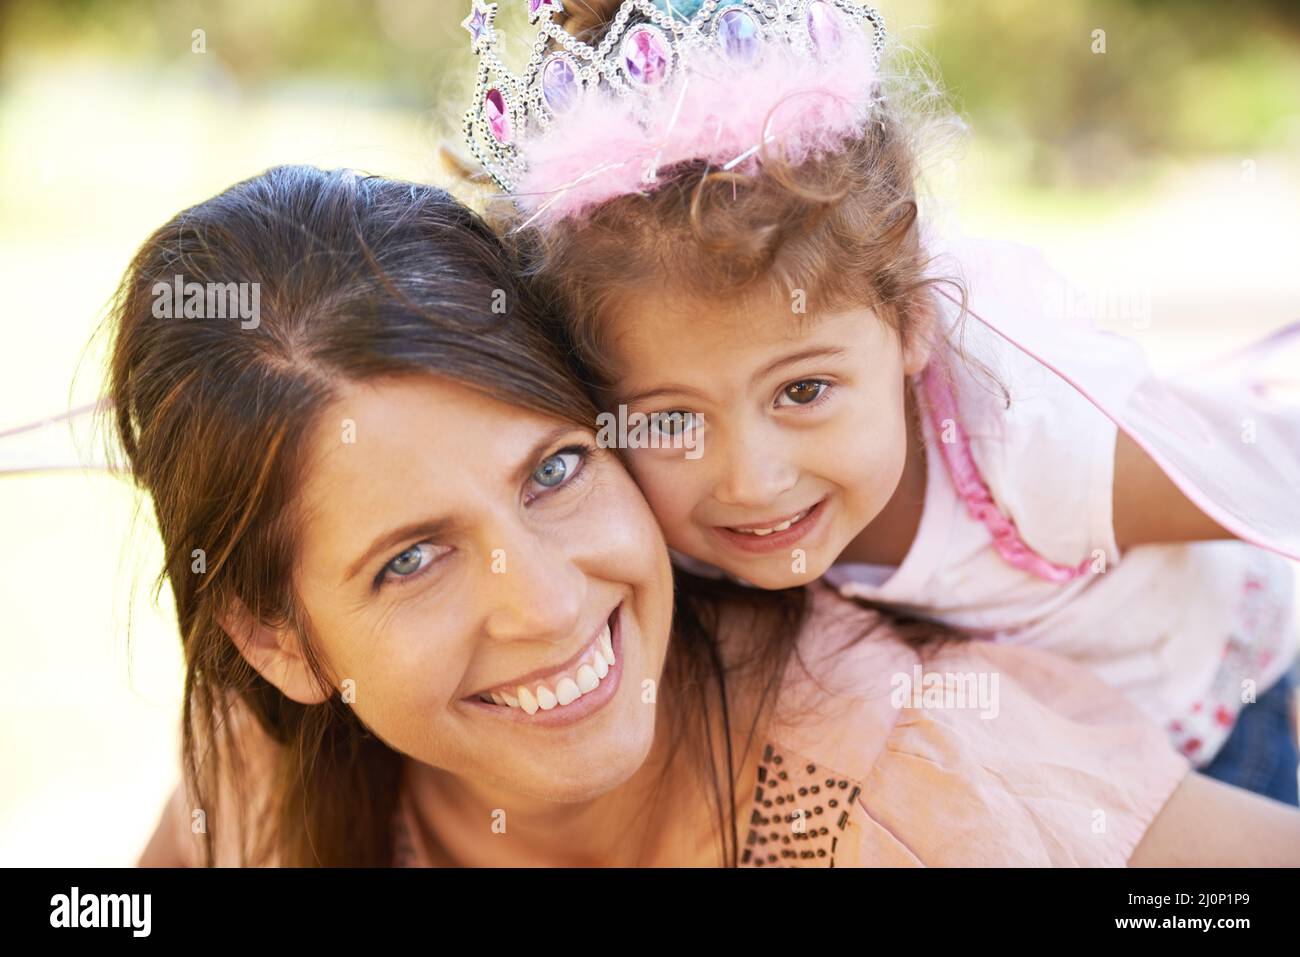 My little princess. Cropped shot of a beautiful woman and her daughter playing outdoors. Stock Photo